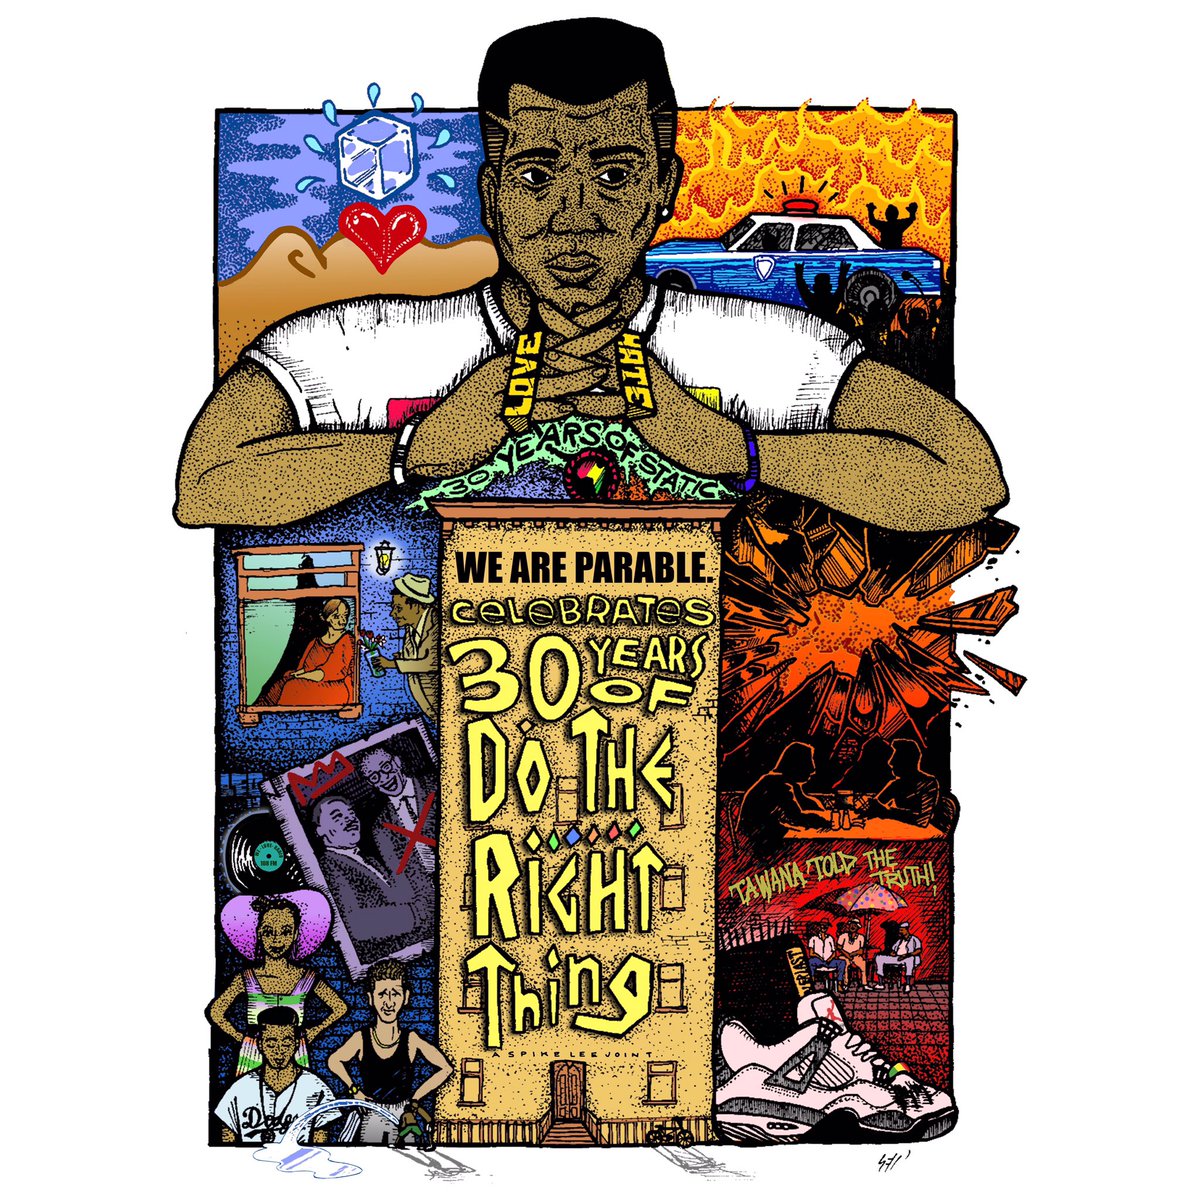 A BIG Happy 10th Anniversary to @weareparable 🥳🎉
———
Here’s a 2023 colourised version (spot the updated logo) of illustration for We Are Parable’s - “Do The Right Thing” 30th celebration back in 2019 at The Barbican.
#dotherightthing30 #spikelee #weareparable #thebarbican #art